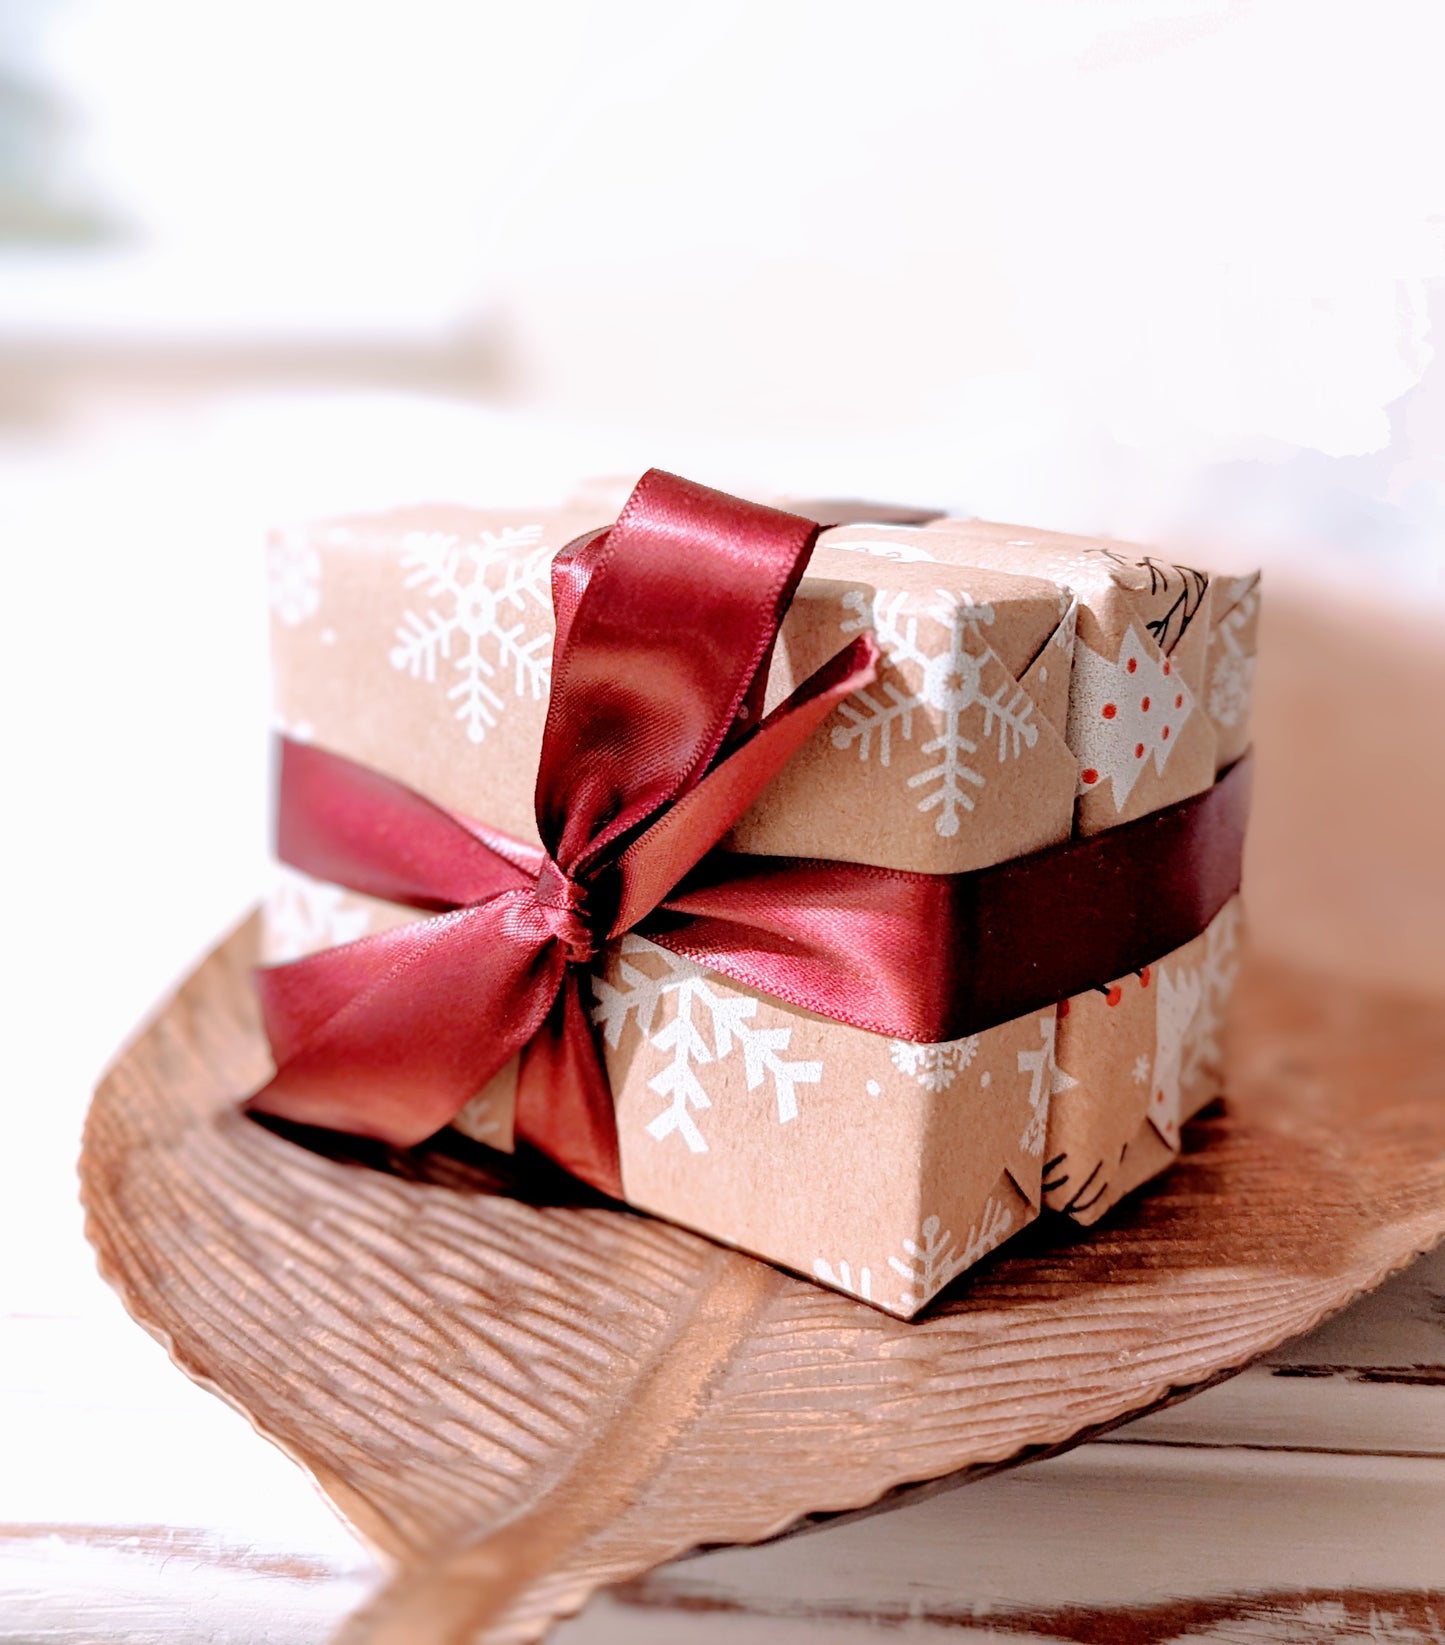 Christmas Gift Set |Kefir Soap for Glowing Skin | Vegan, Hand-made, Palm-oil free